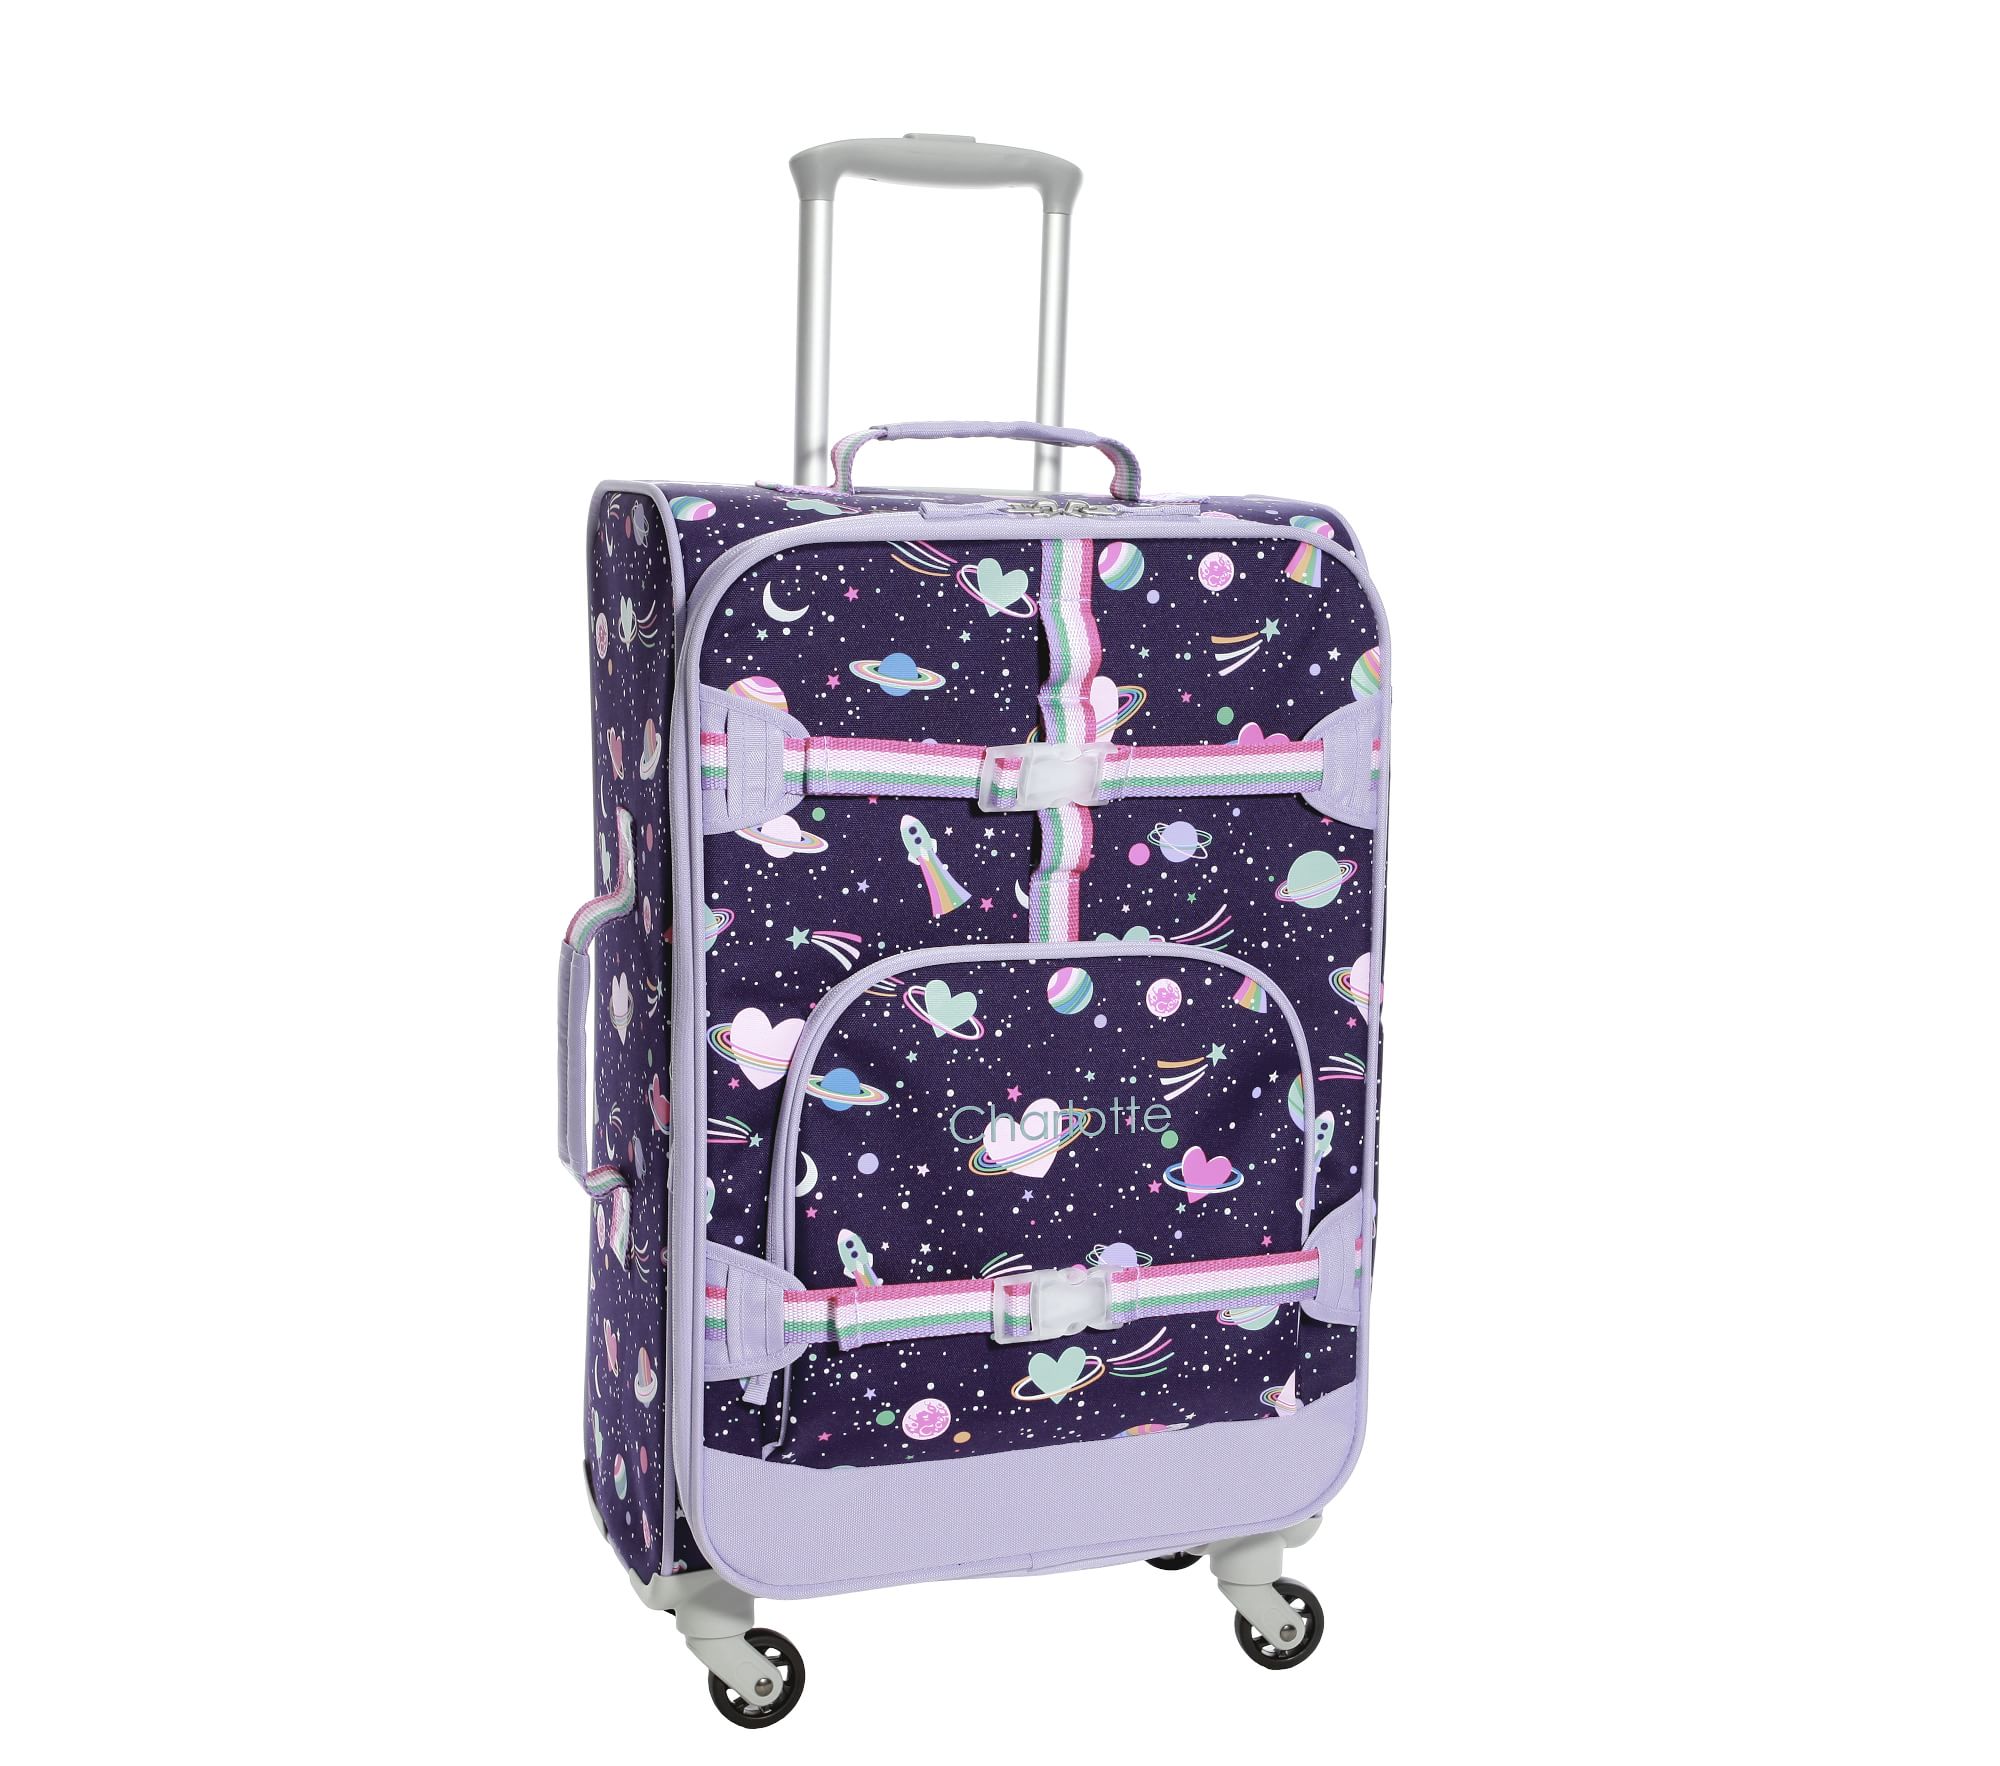 Glow in the dark luggage by Pottery Barn Kids for the best luggage for kids ideas